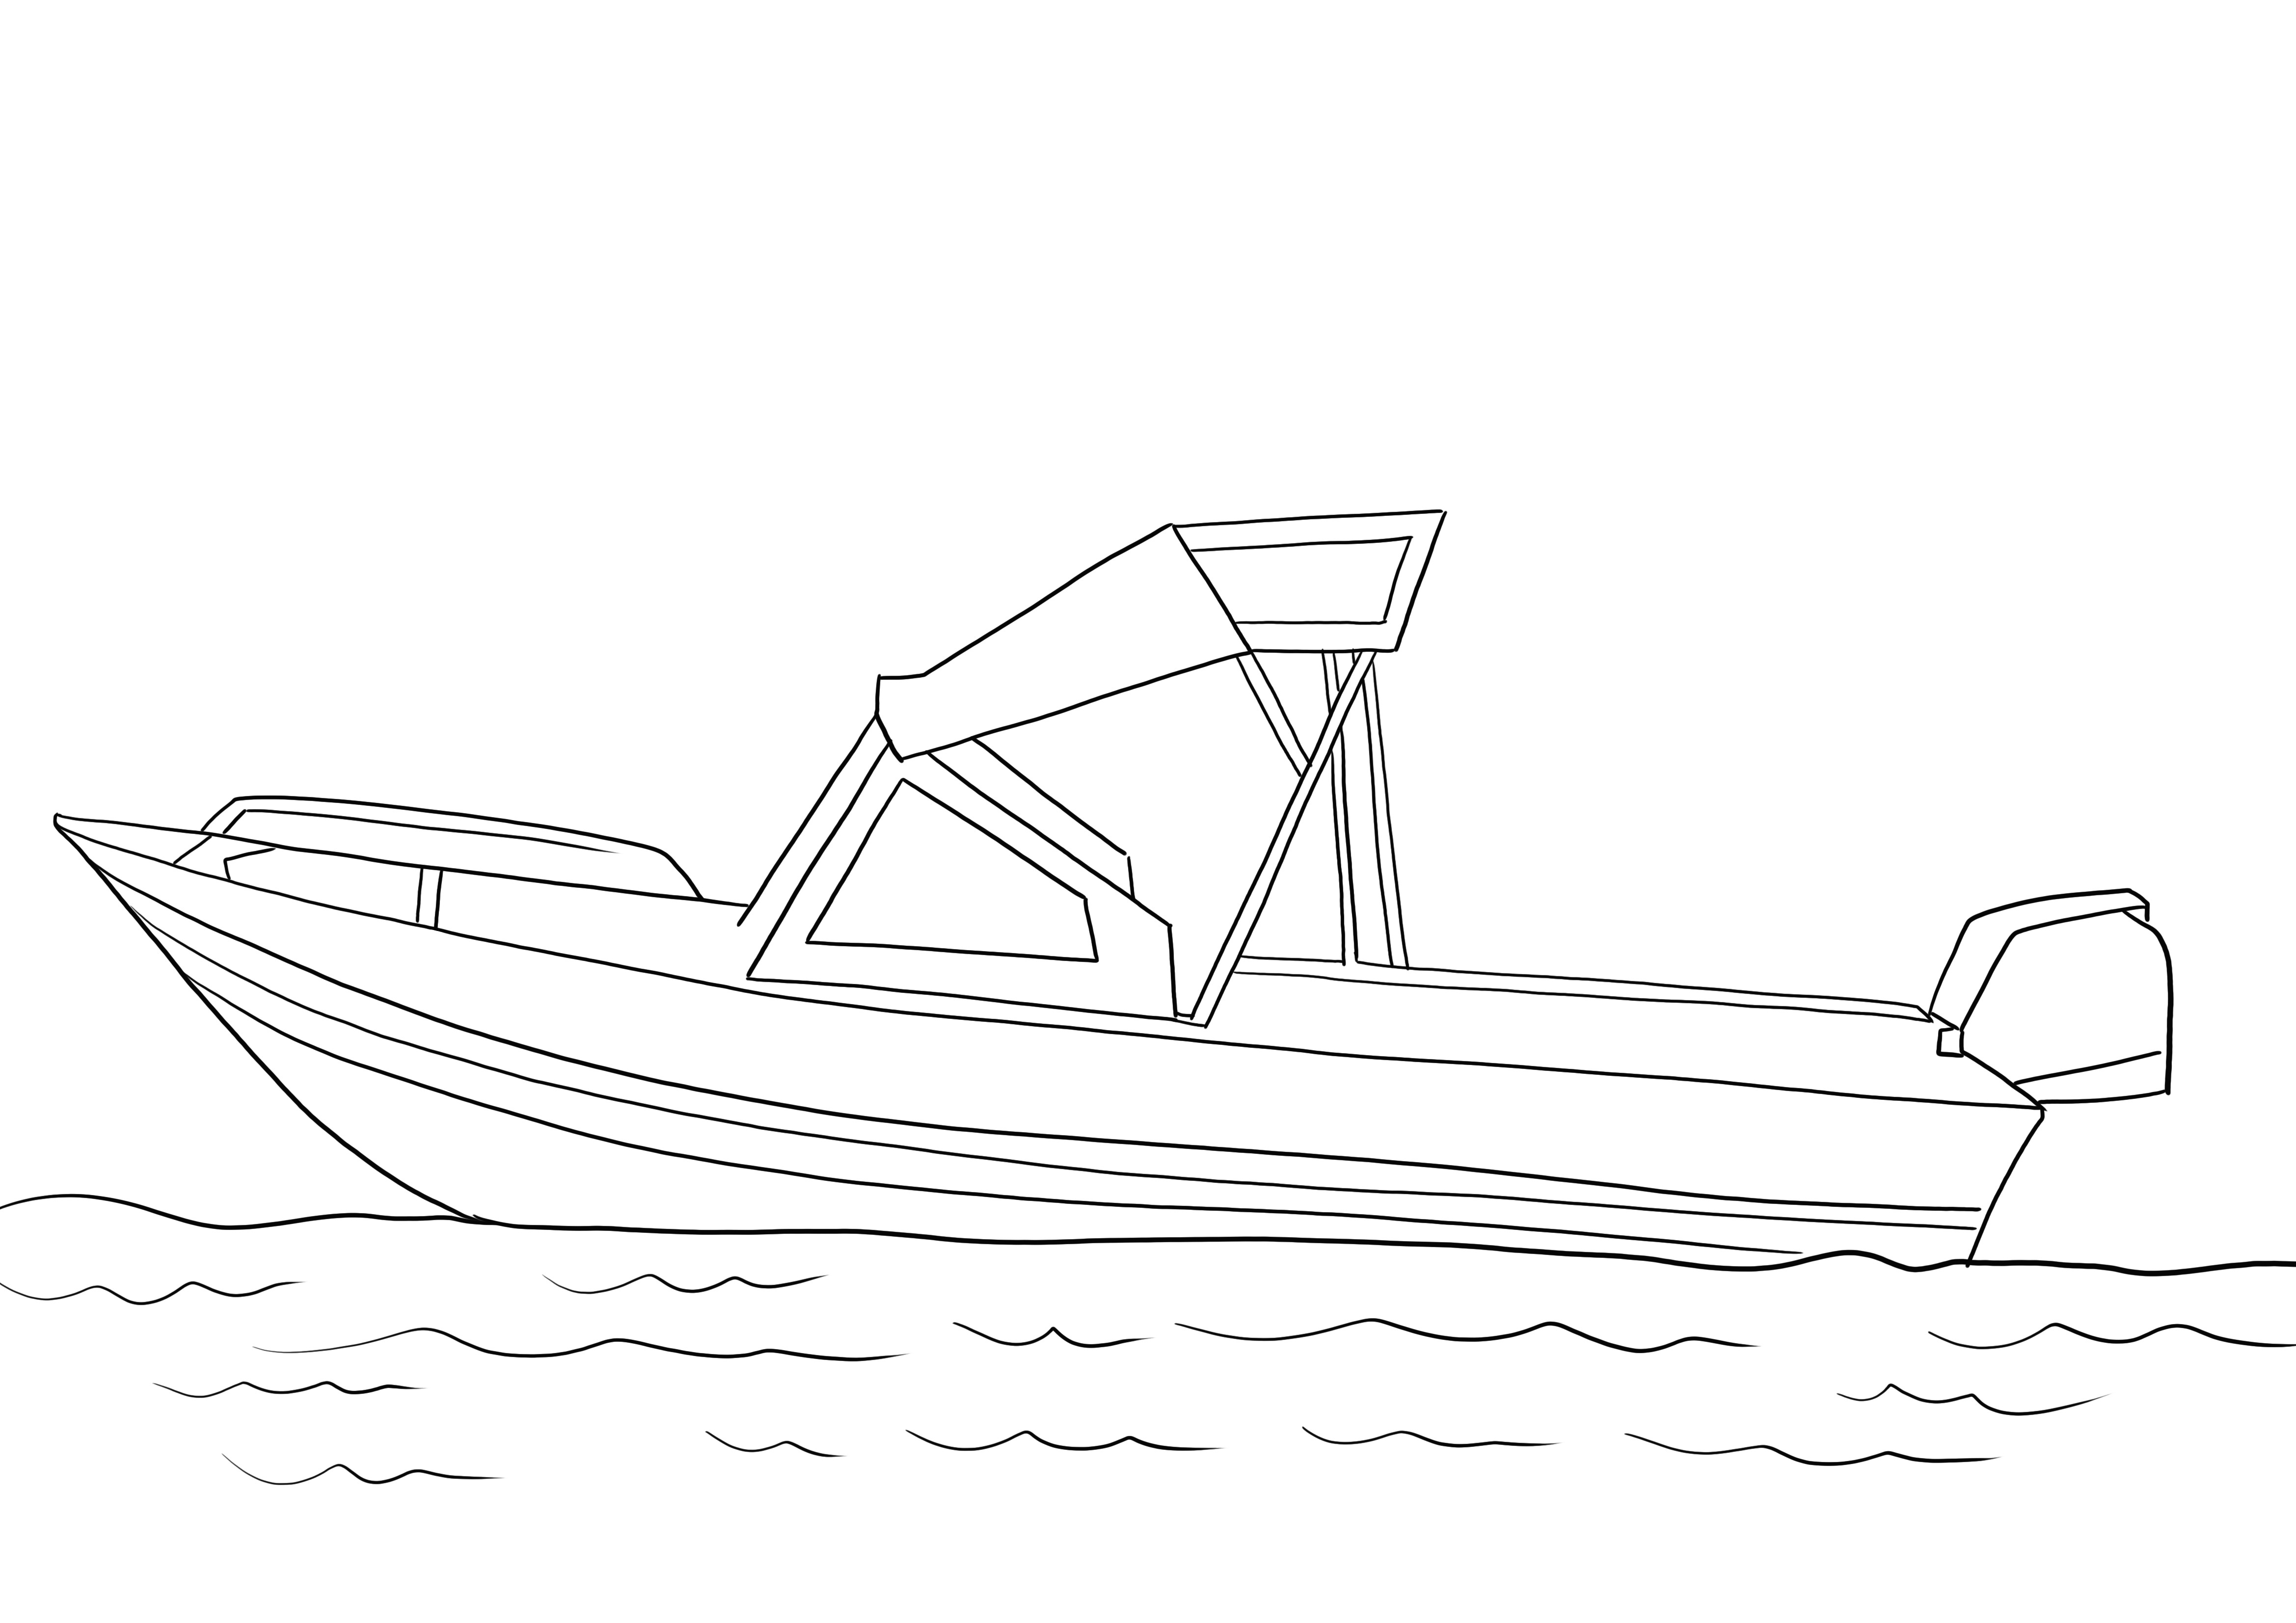 Free Fishing Boat coloring page to print or easy download